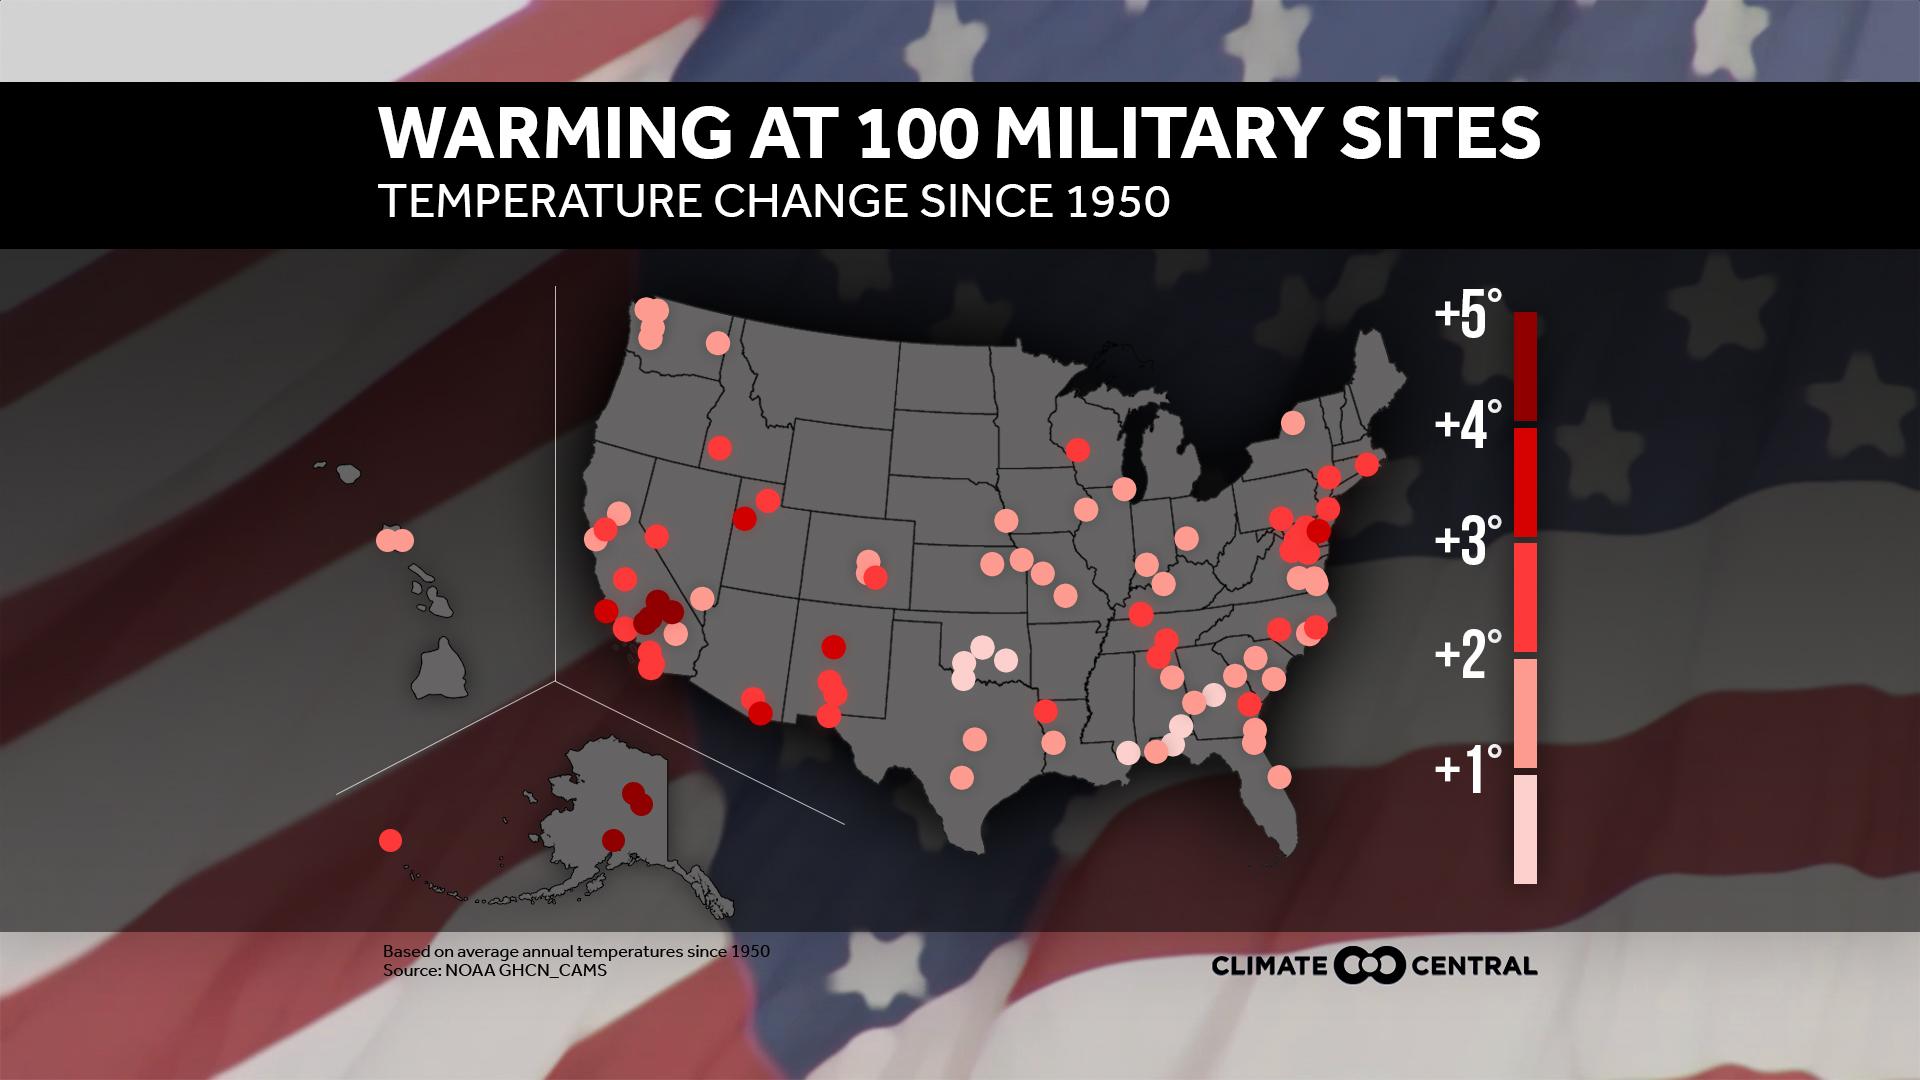 warming at military sites across the U.S.